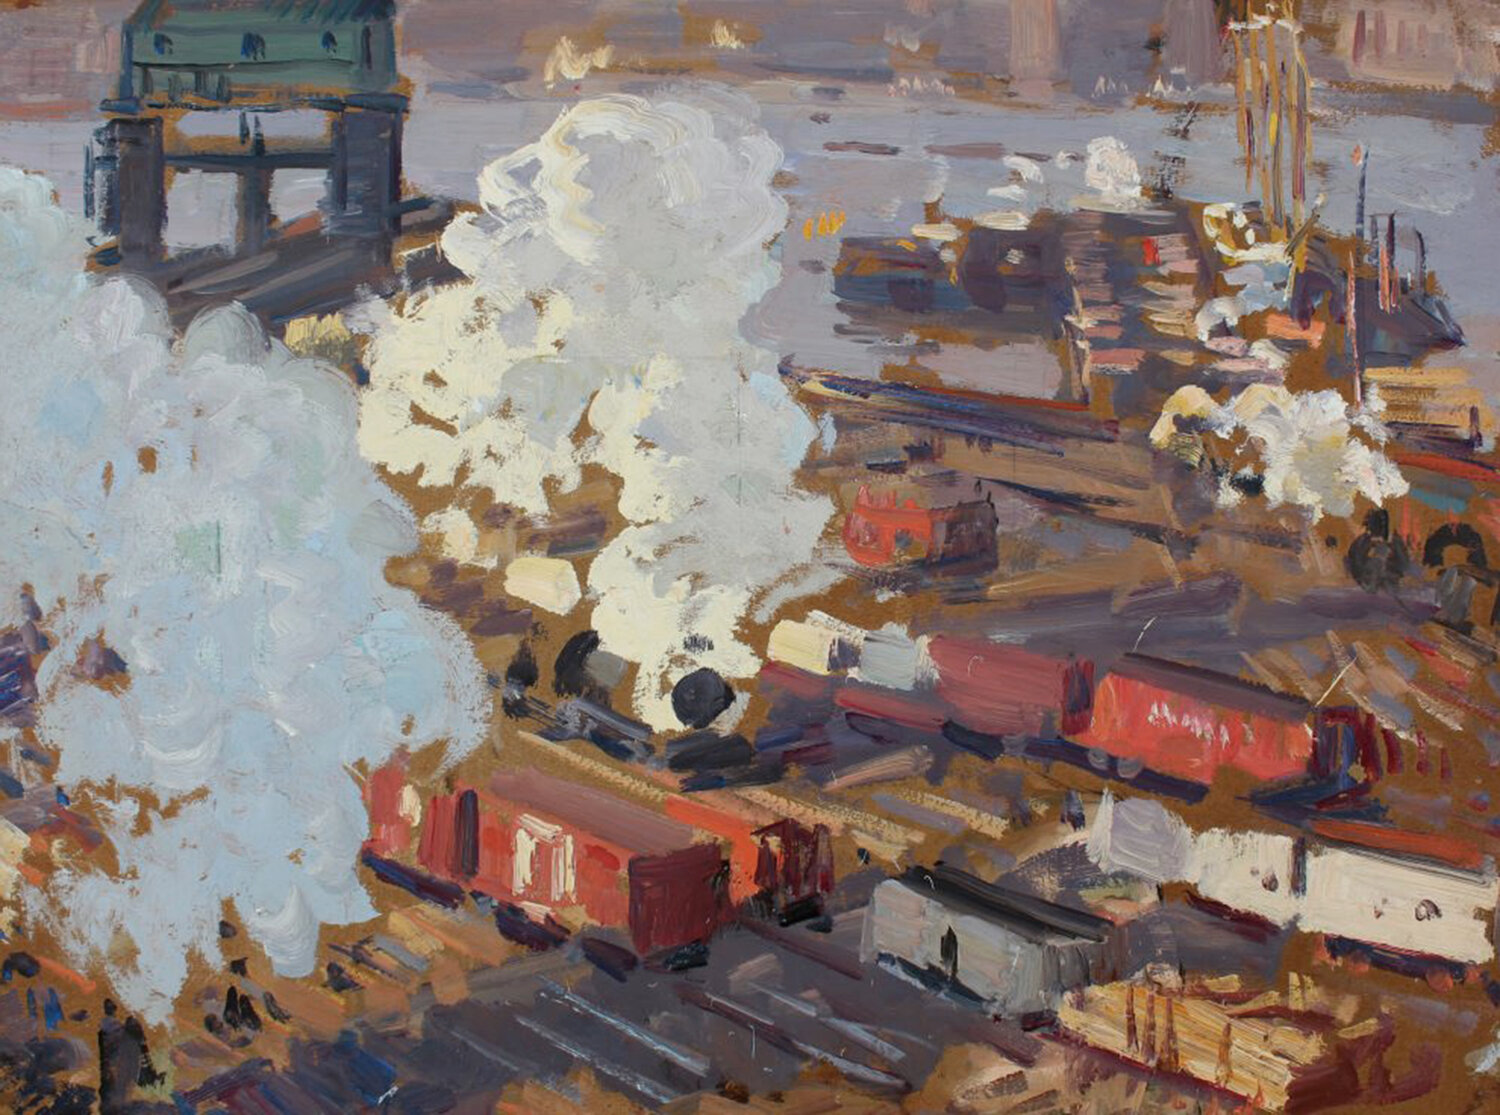 Image of railway scene with steam in New York City 